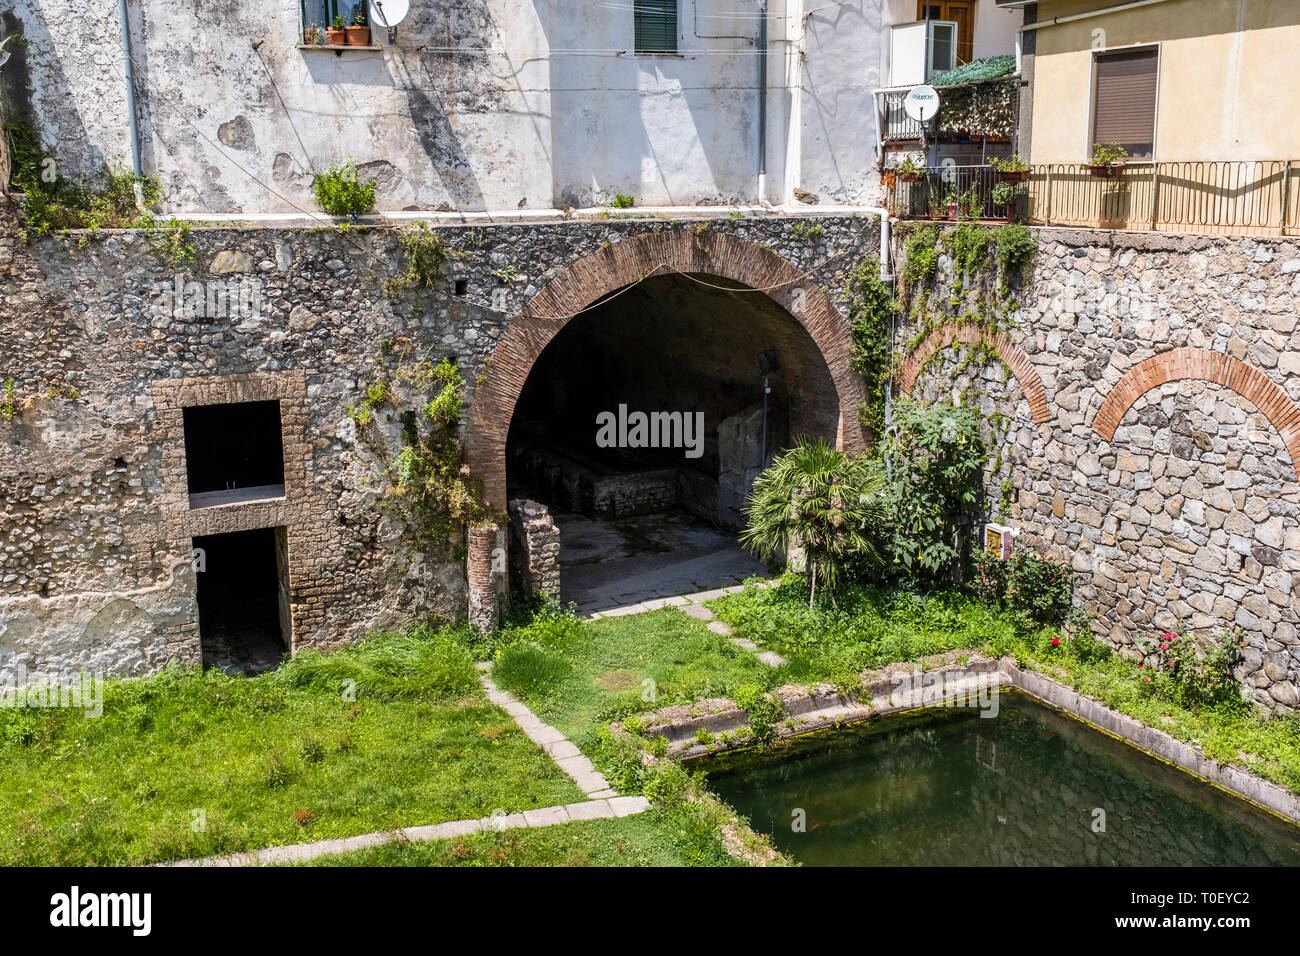 Scenes and details from Villa Romana, an ancient Roman archaeological site hidden in the village of Minori, Italy on the Amalfi Coast Stock Photo